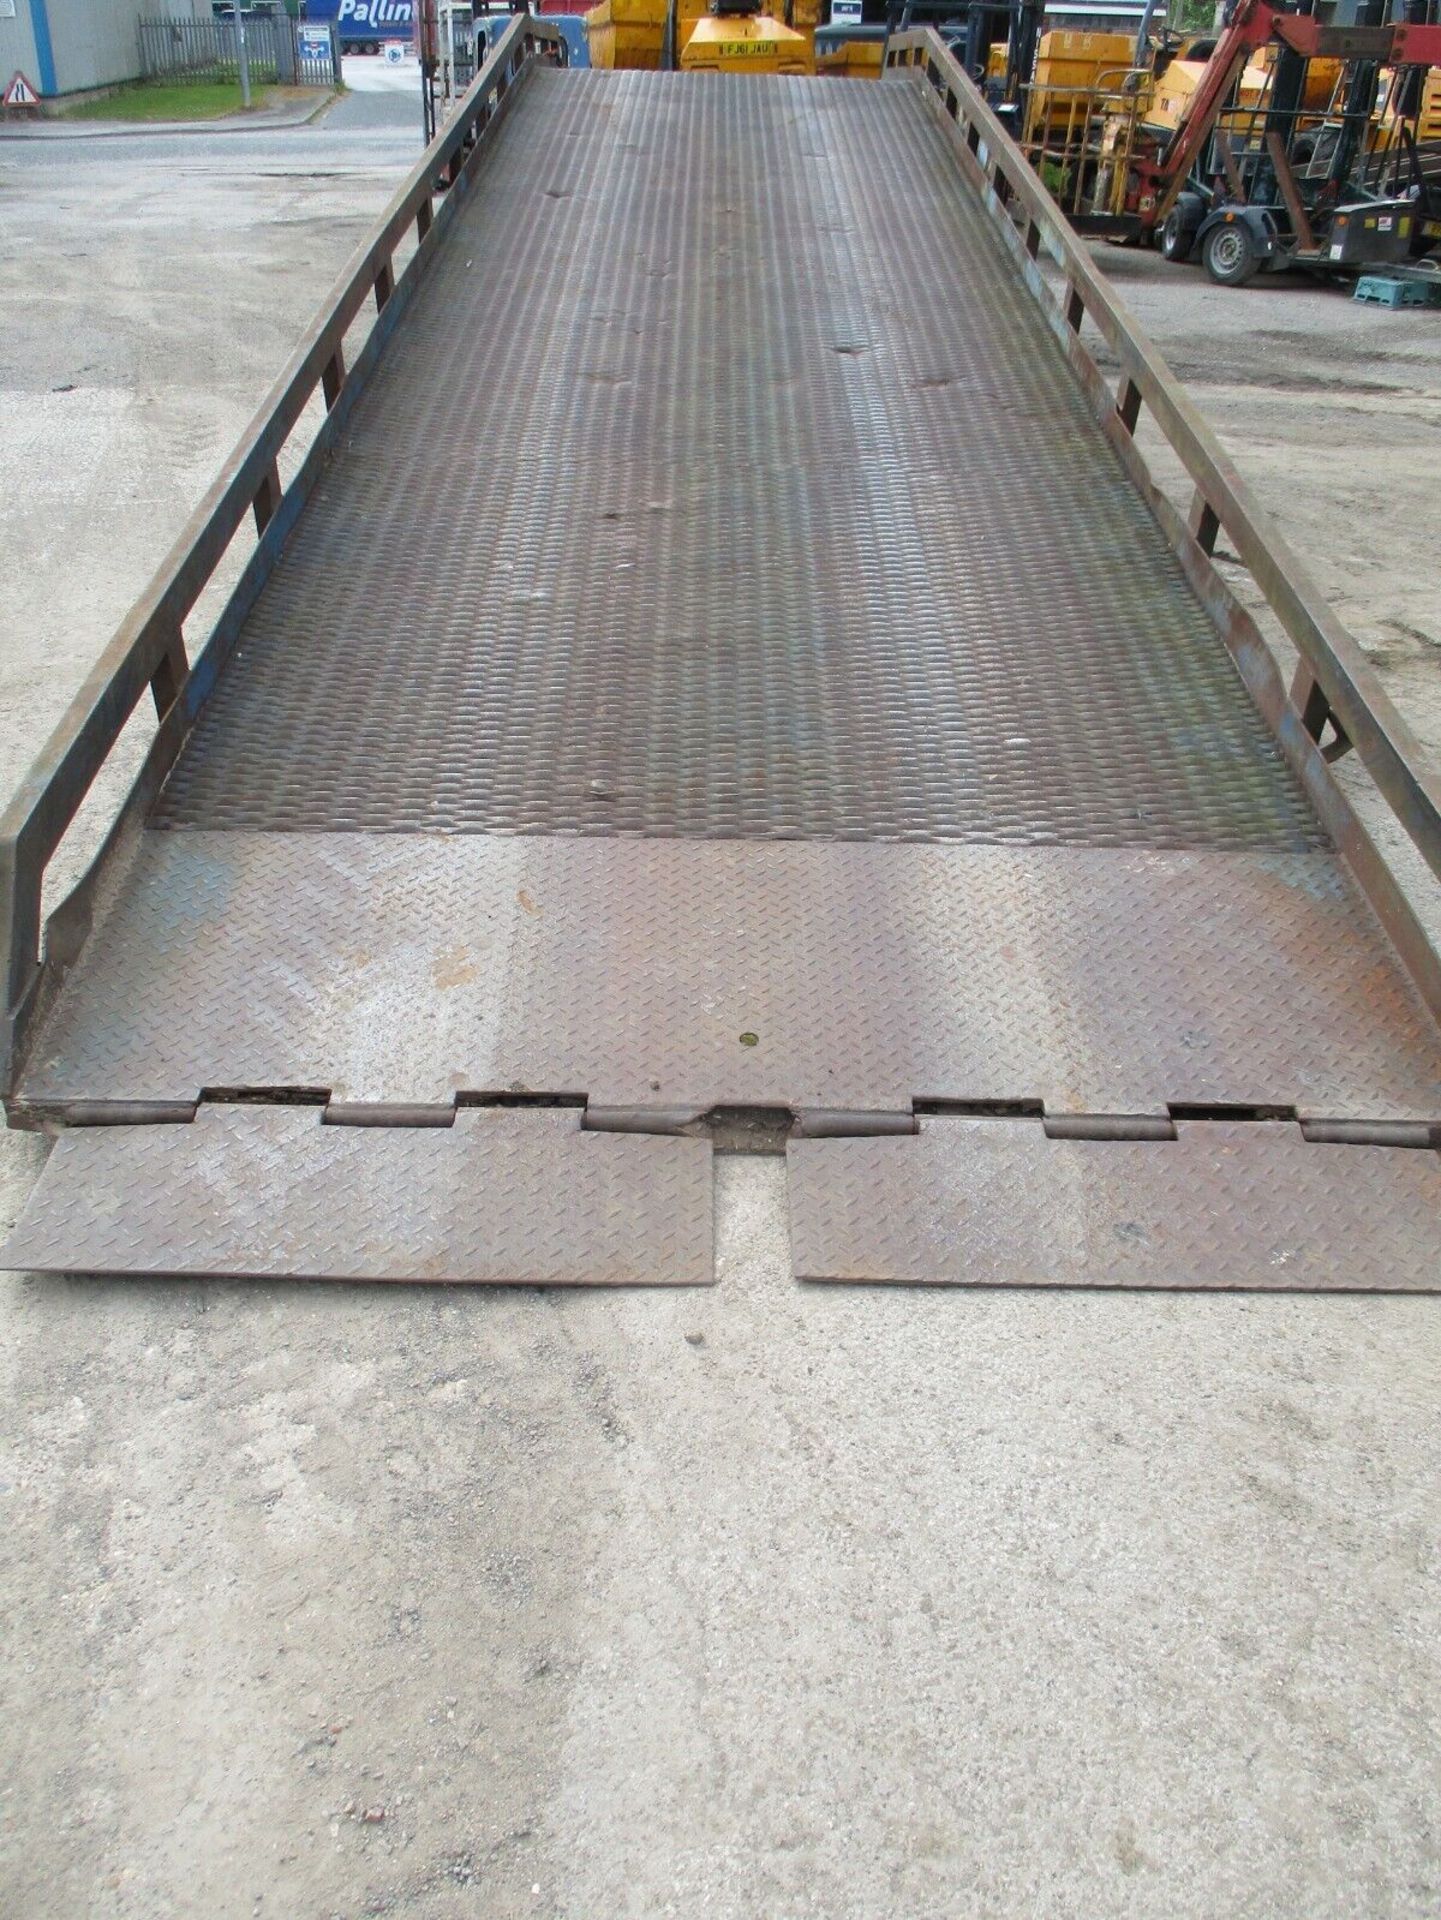 LANTERN CONTAINER LOADING RAMP - Image 13 of 14